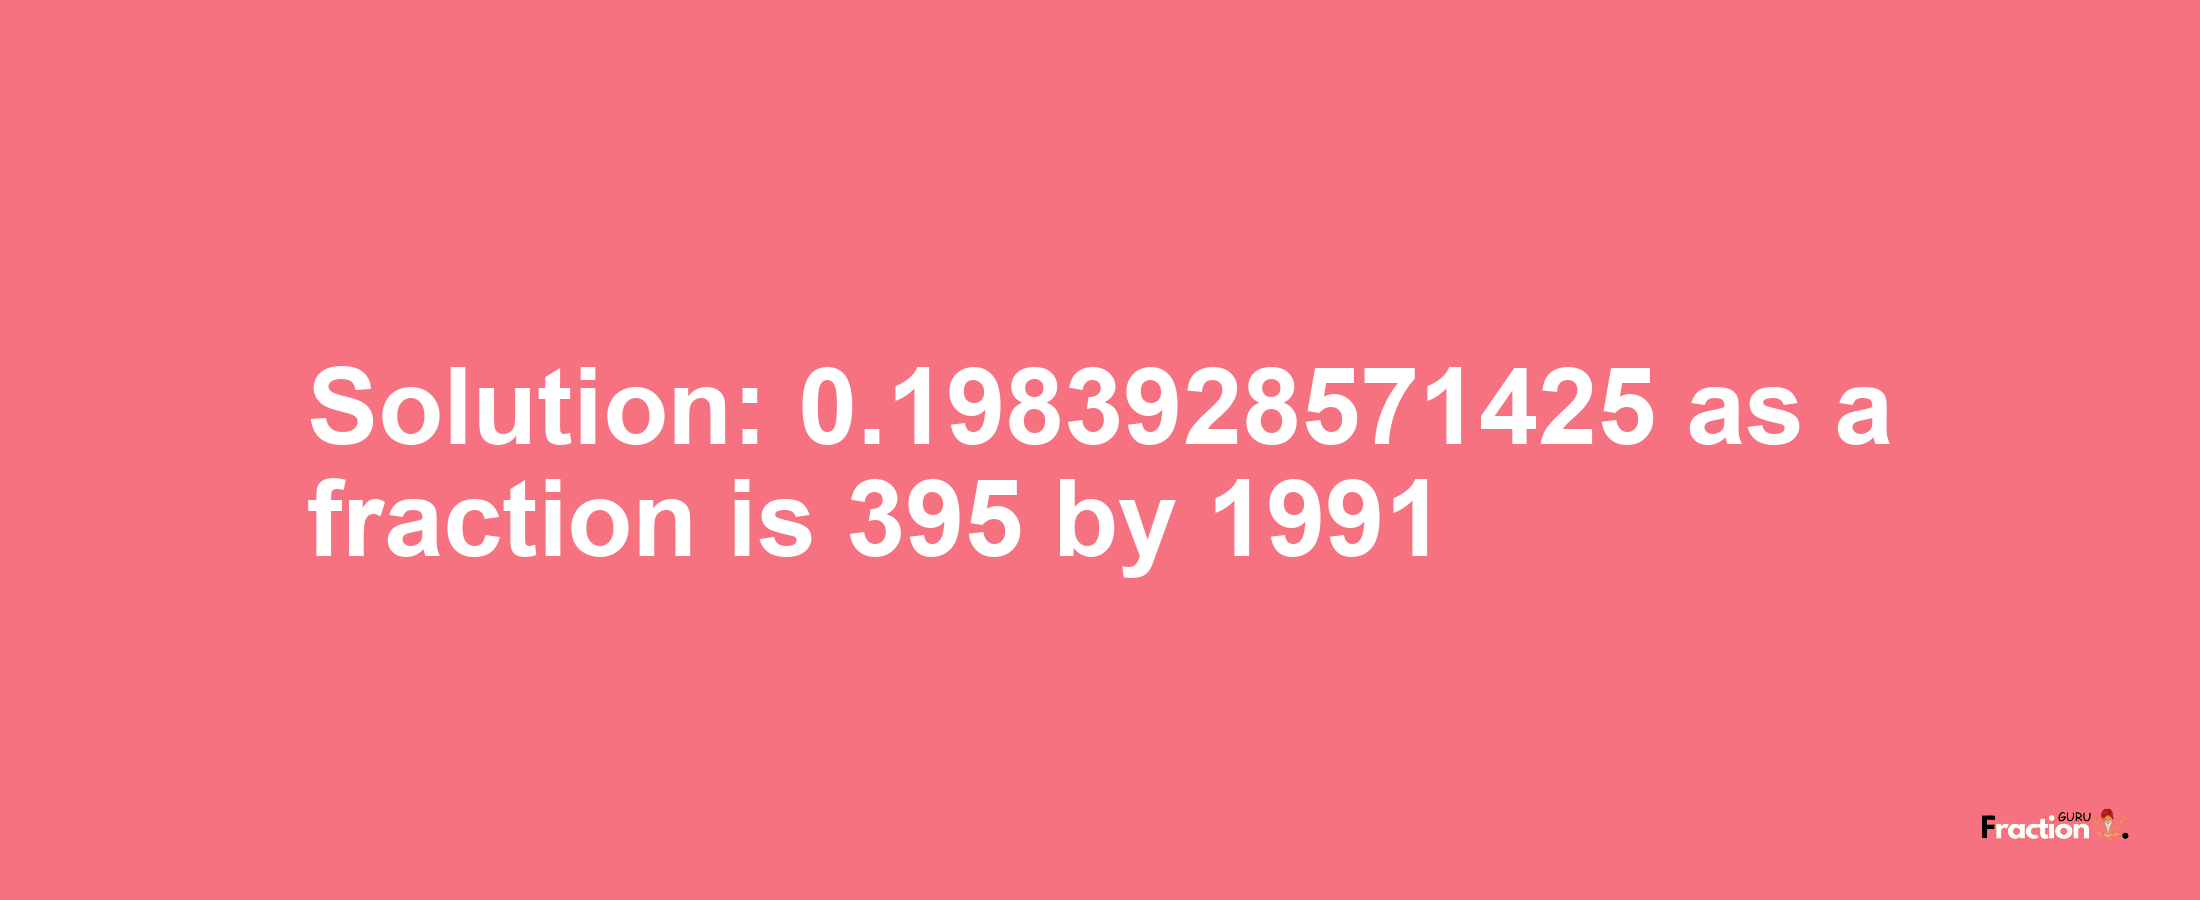 Solution:0.1983928571425 as a fraction is 395/1991